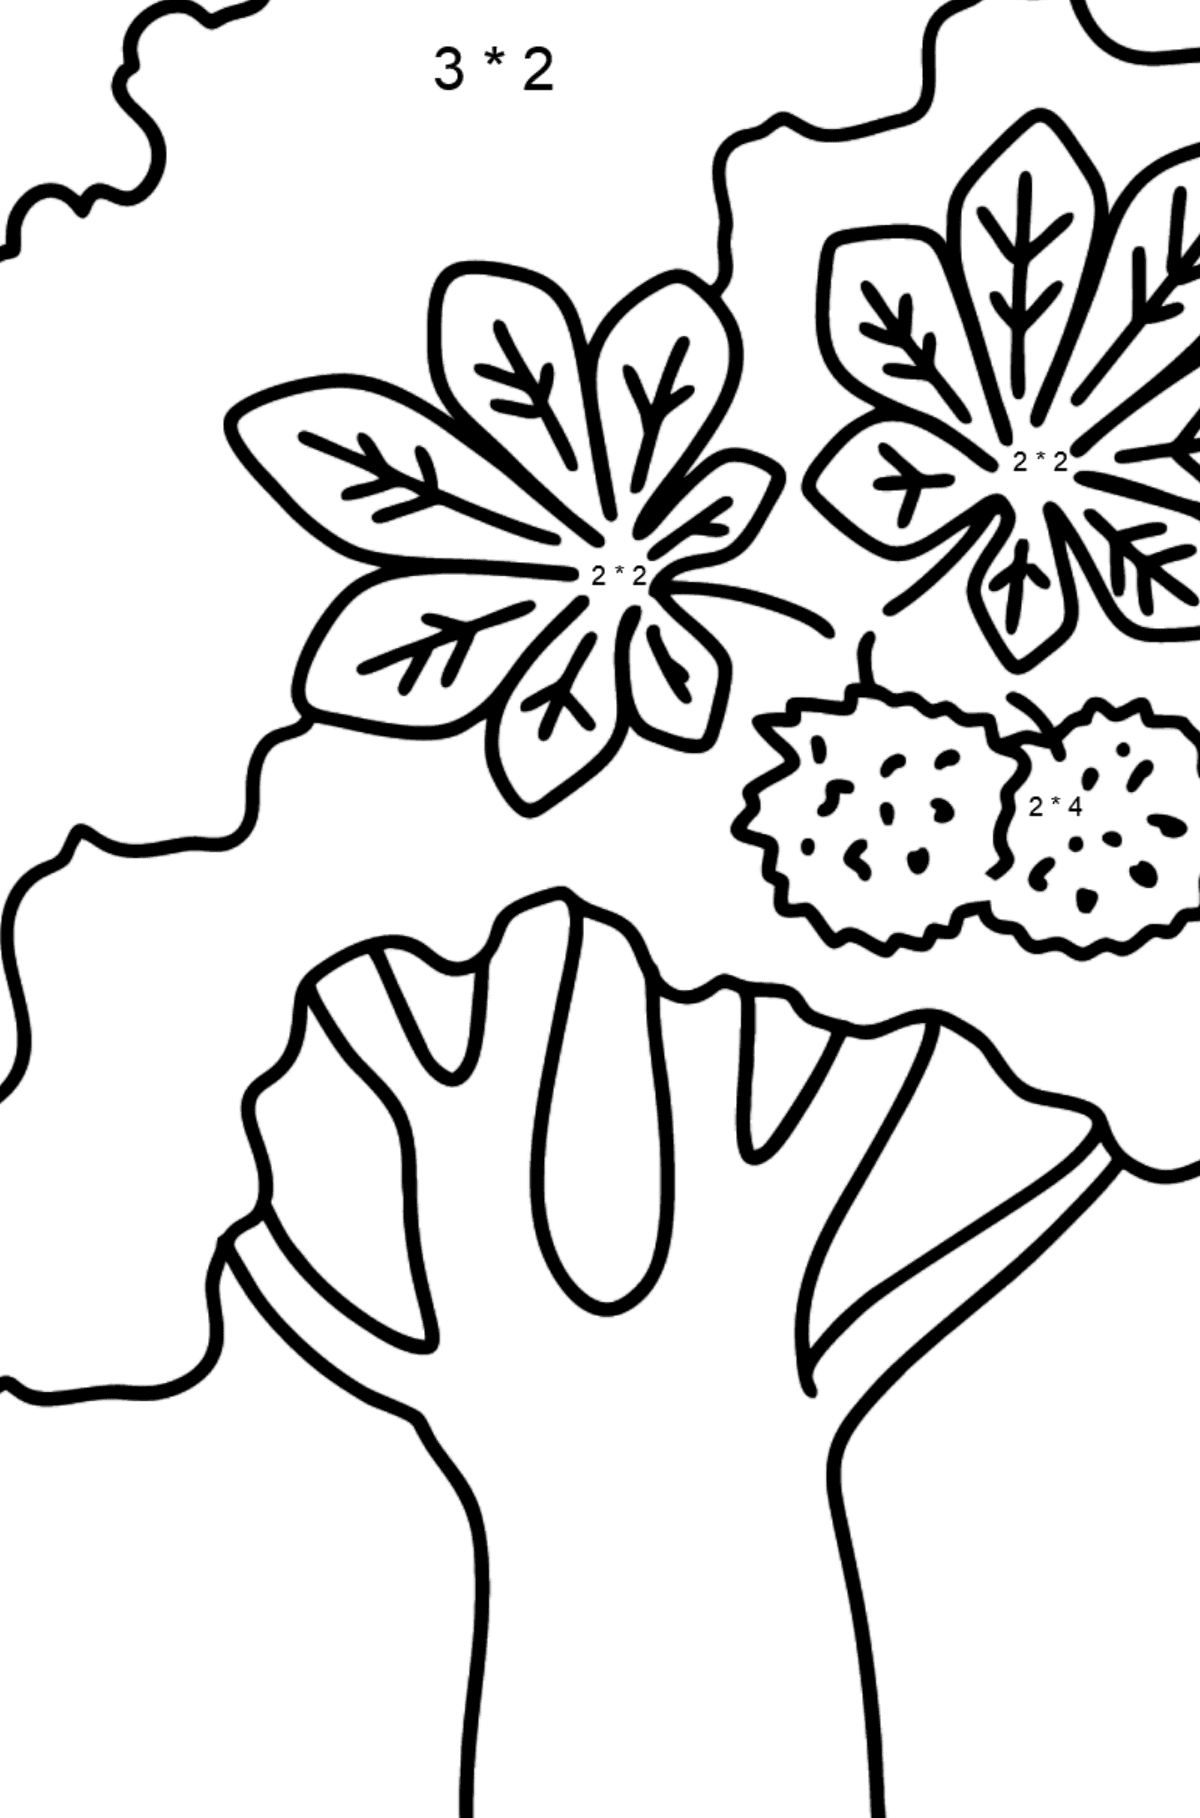 Chestnut coloring page - Math Coloring - Multiplication for Kids